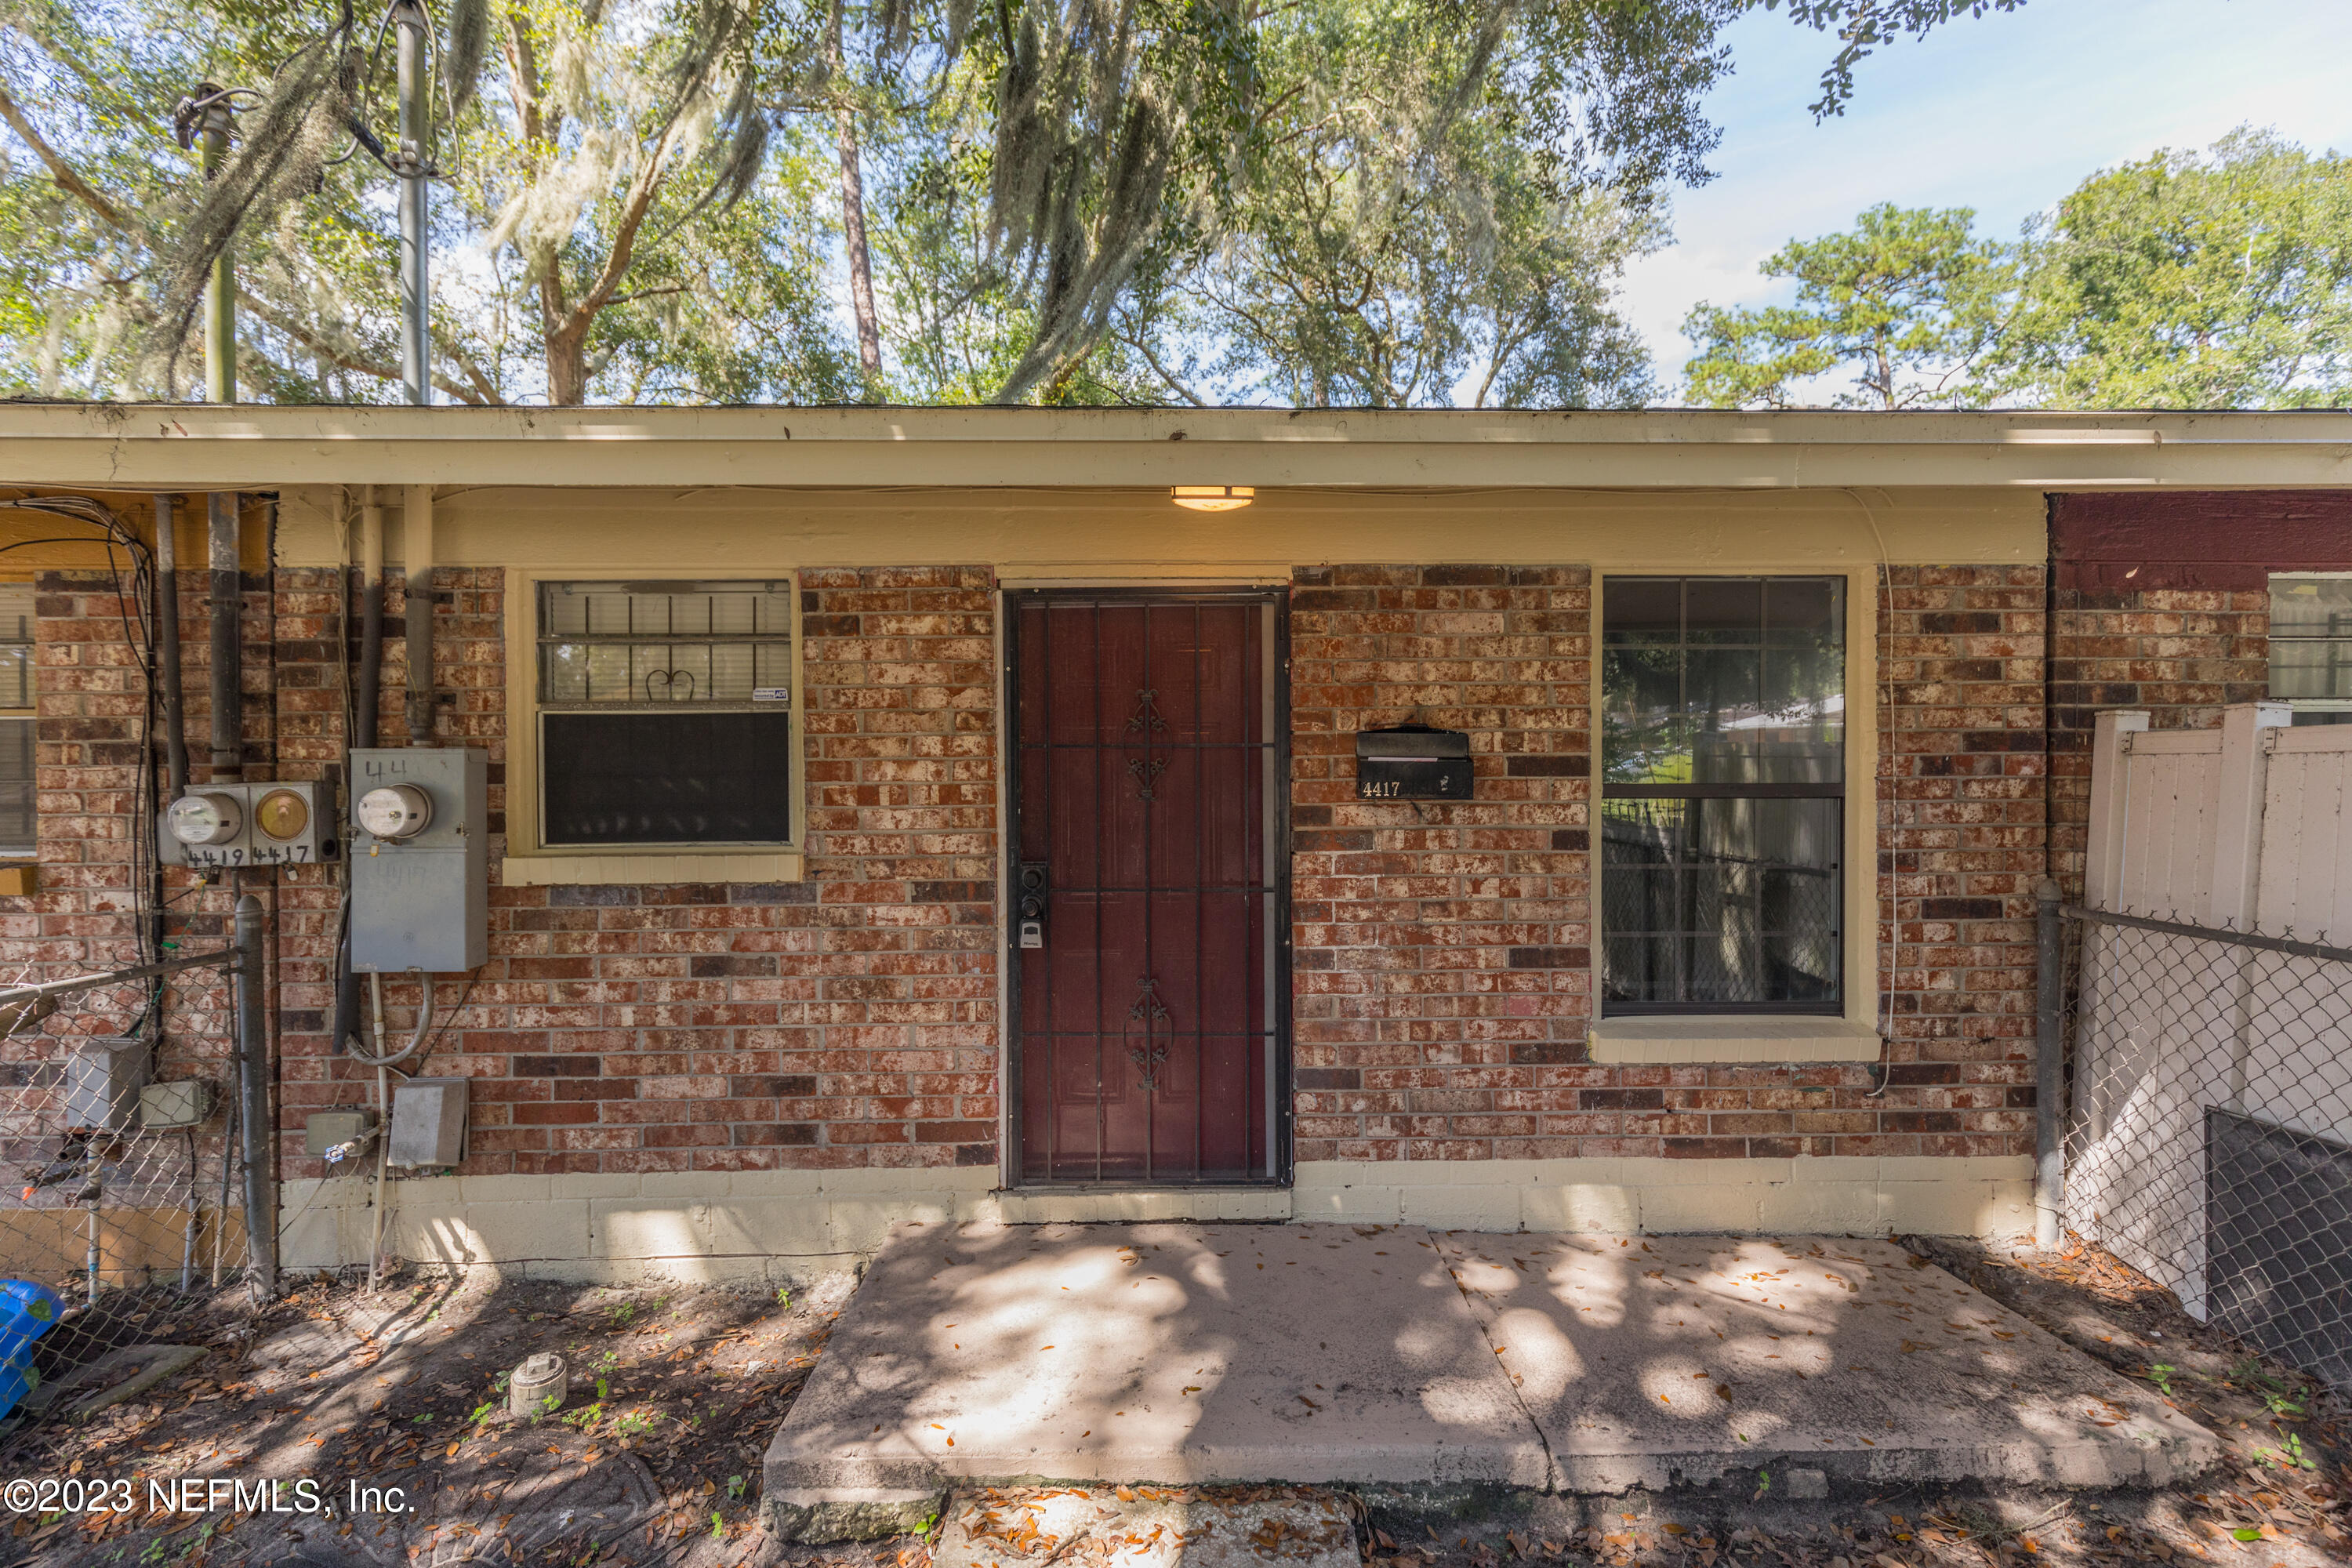 View Jacksonville, FL 32209 townhome